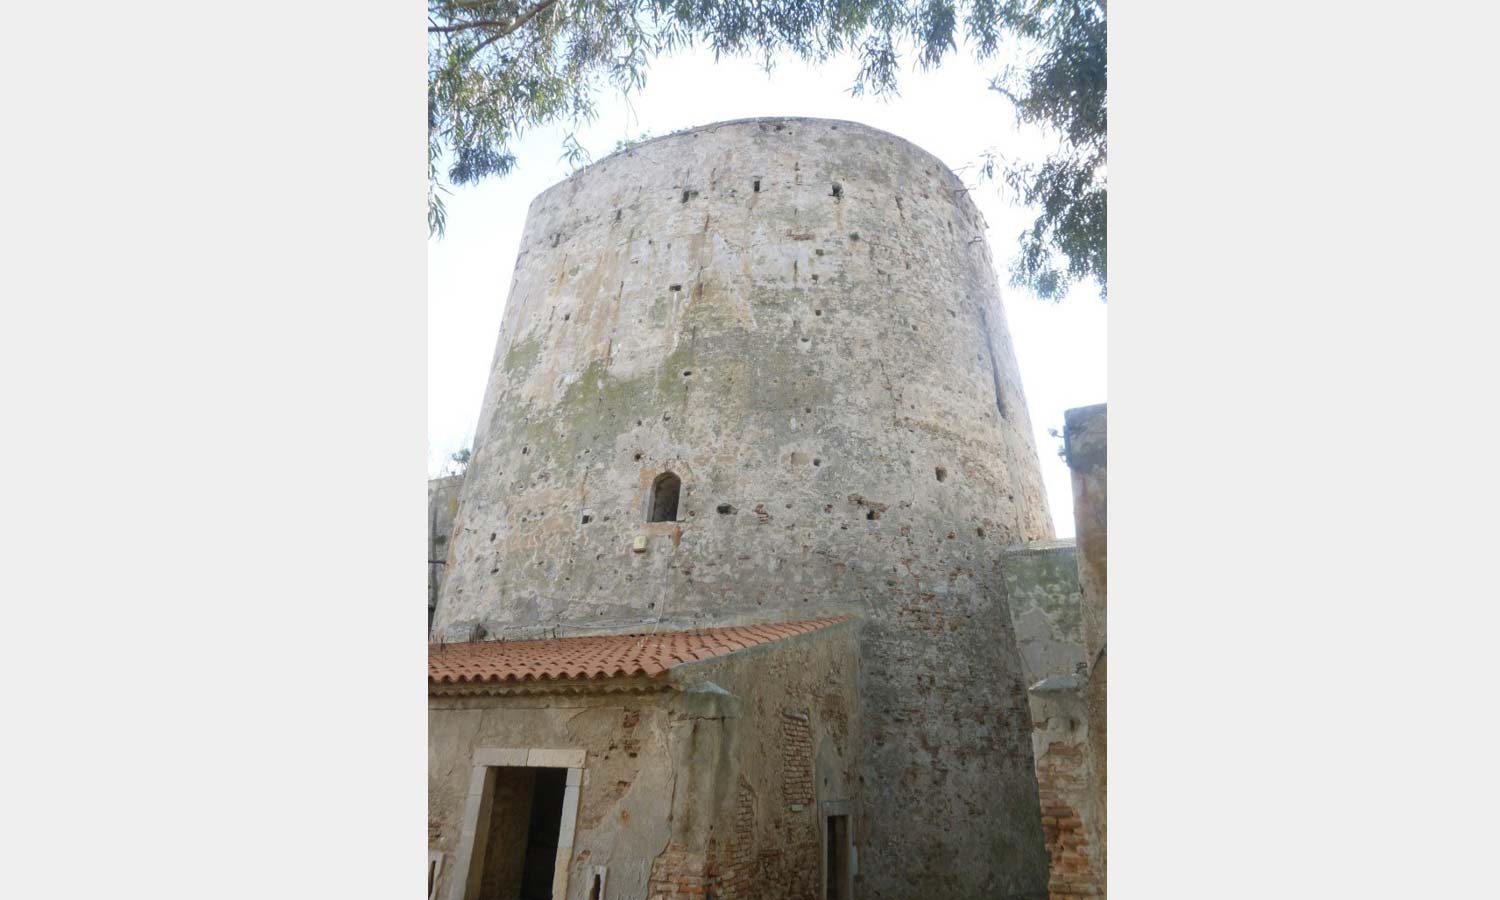 The tower of the fort at Faro.